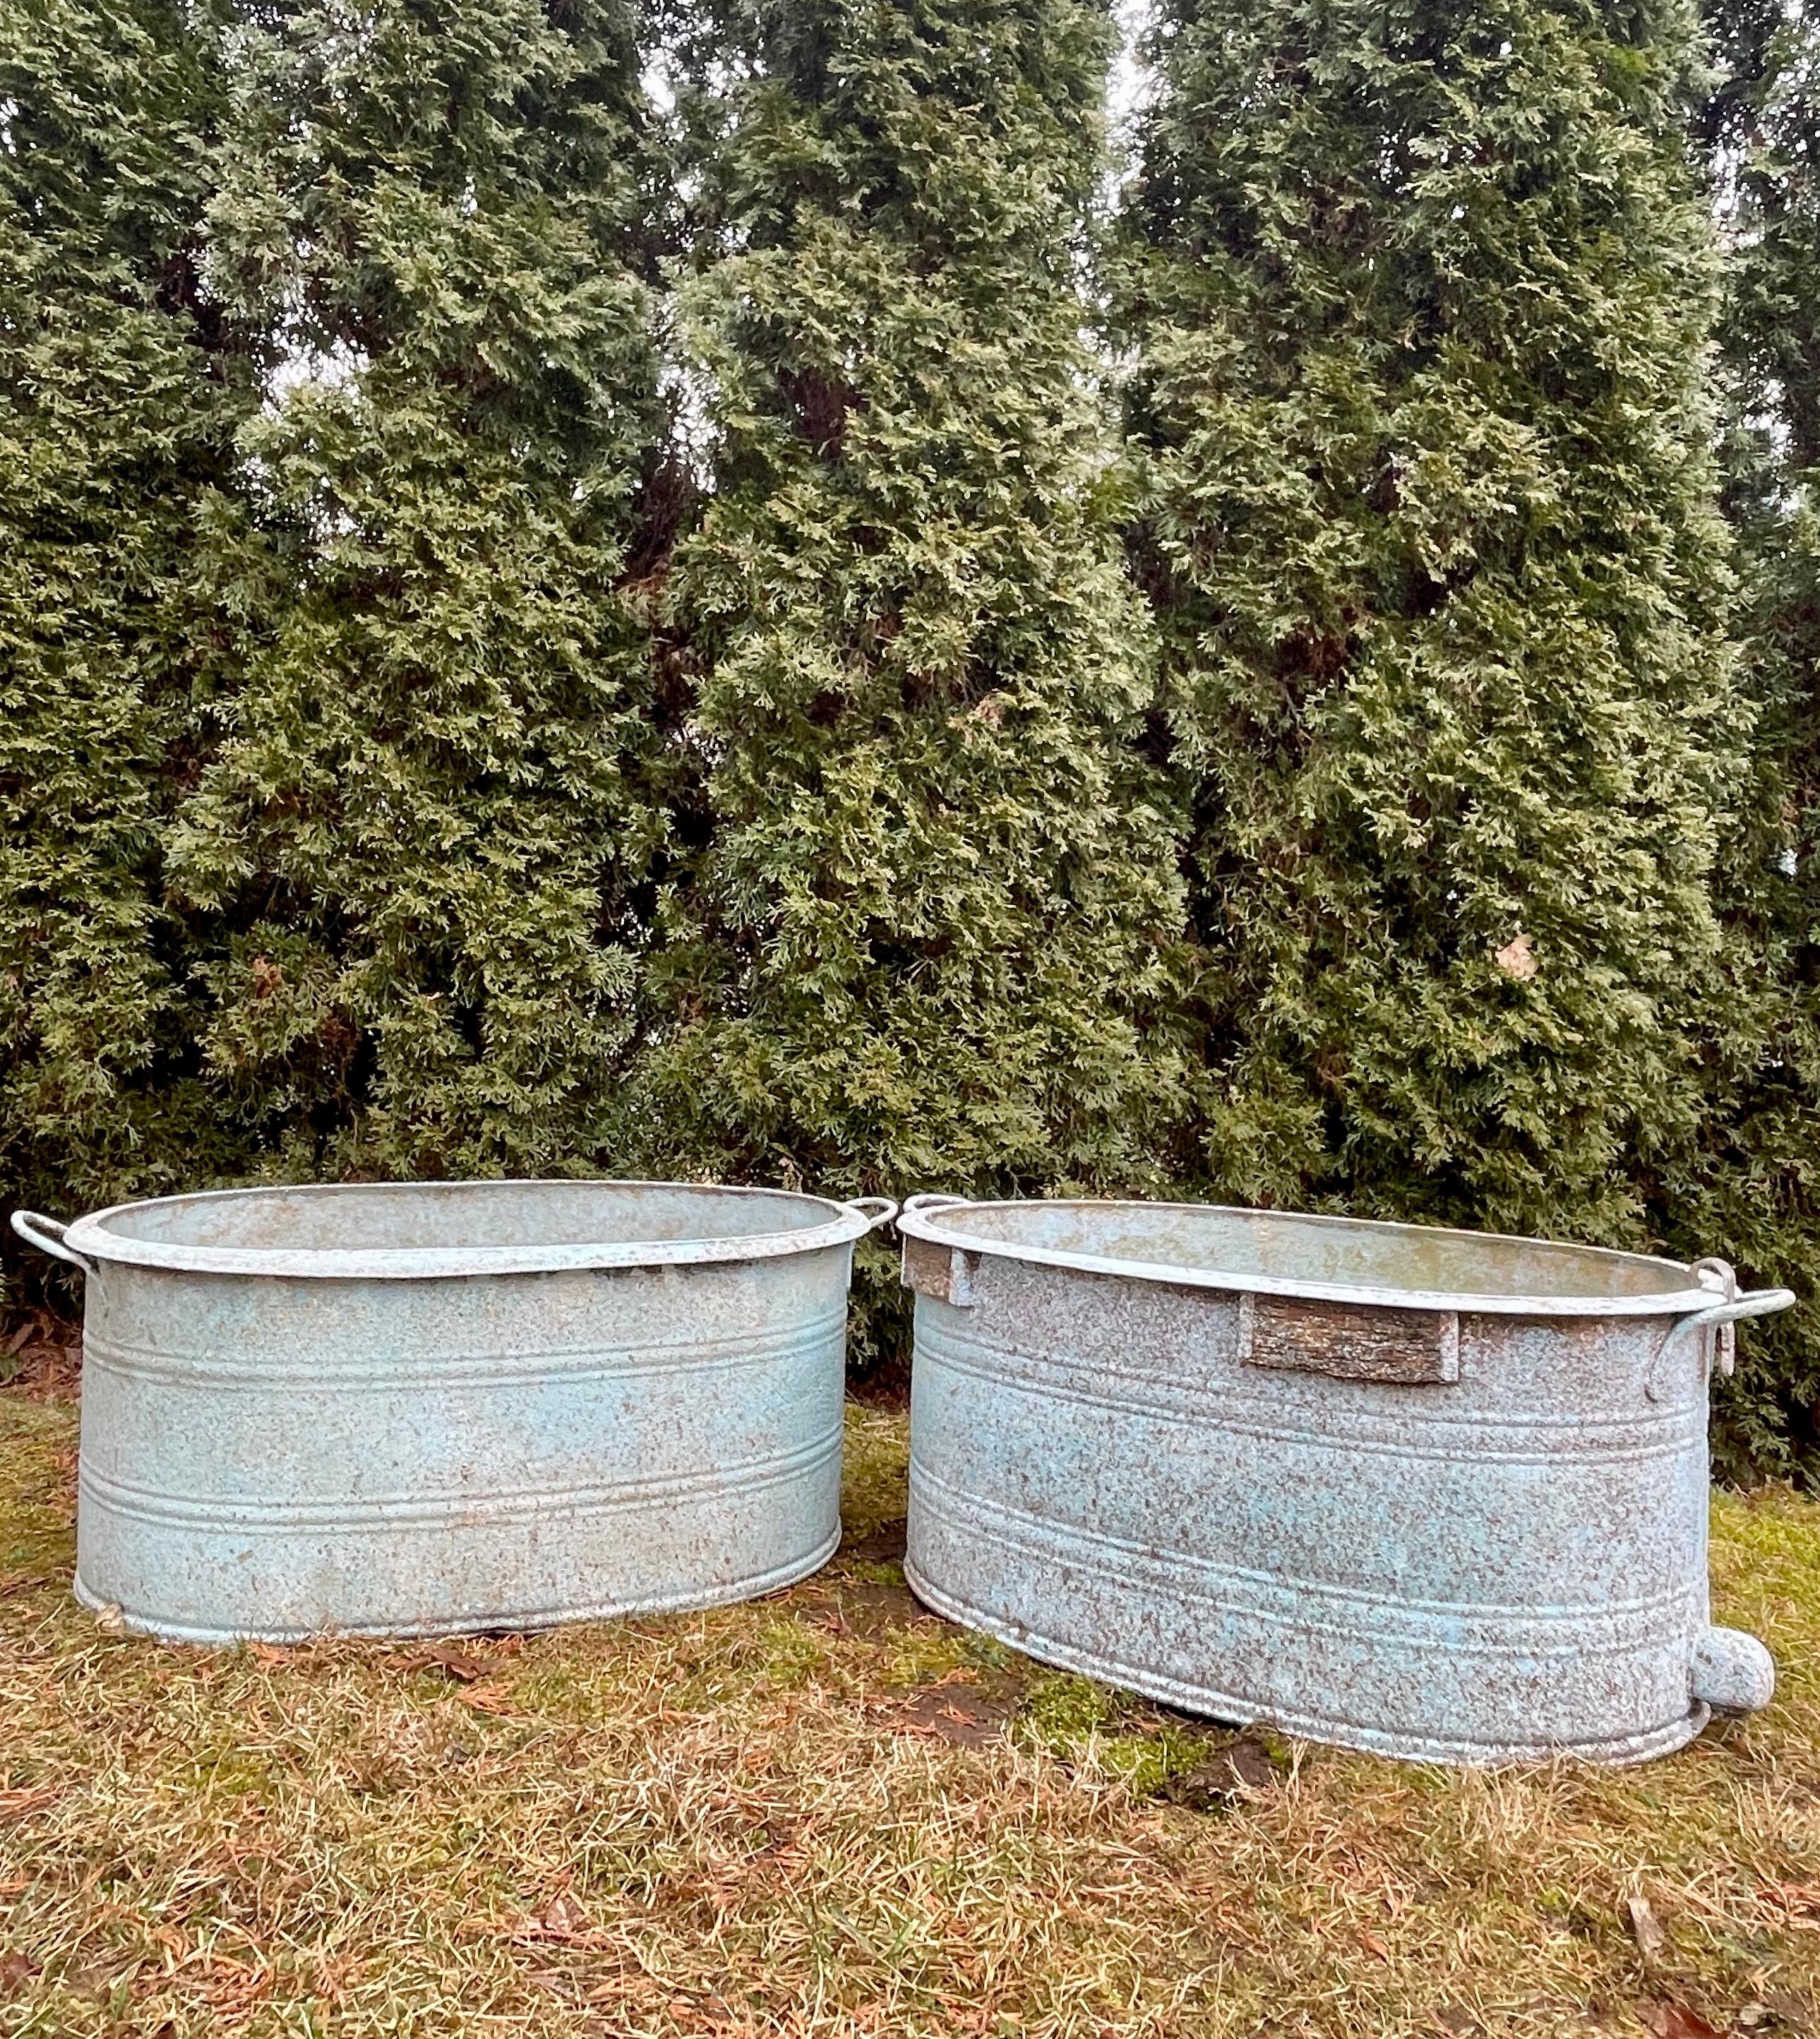 We were fortunate to source several near-pairs of these marvelous galvanized tub planters that date to the 1930s and had them custom-finished by a very talented artisan in Spain. This is the smallest set we have (the other 3 pairs are larger). The